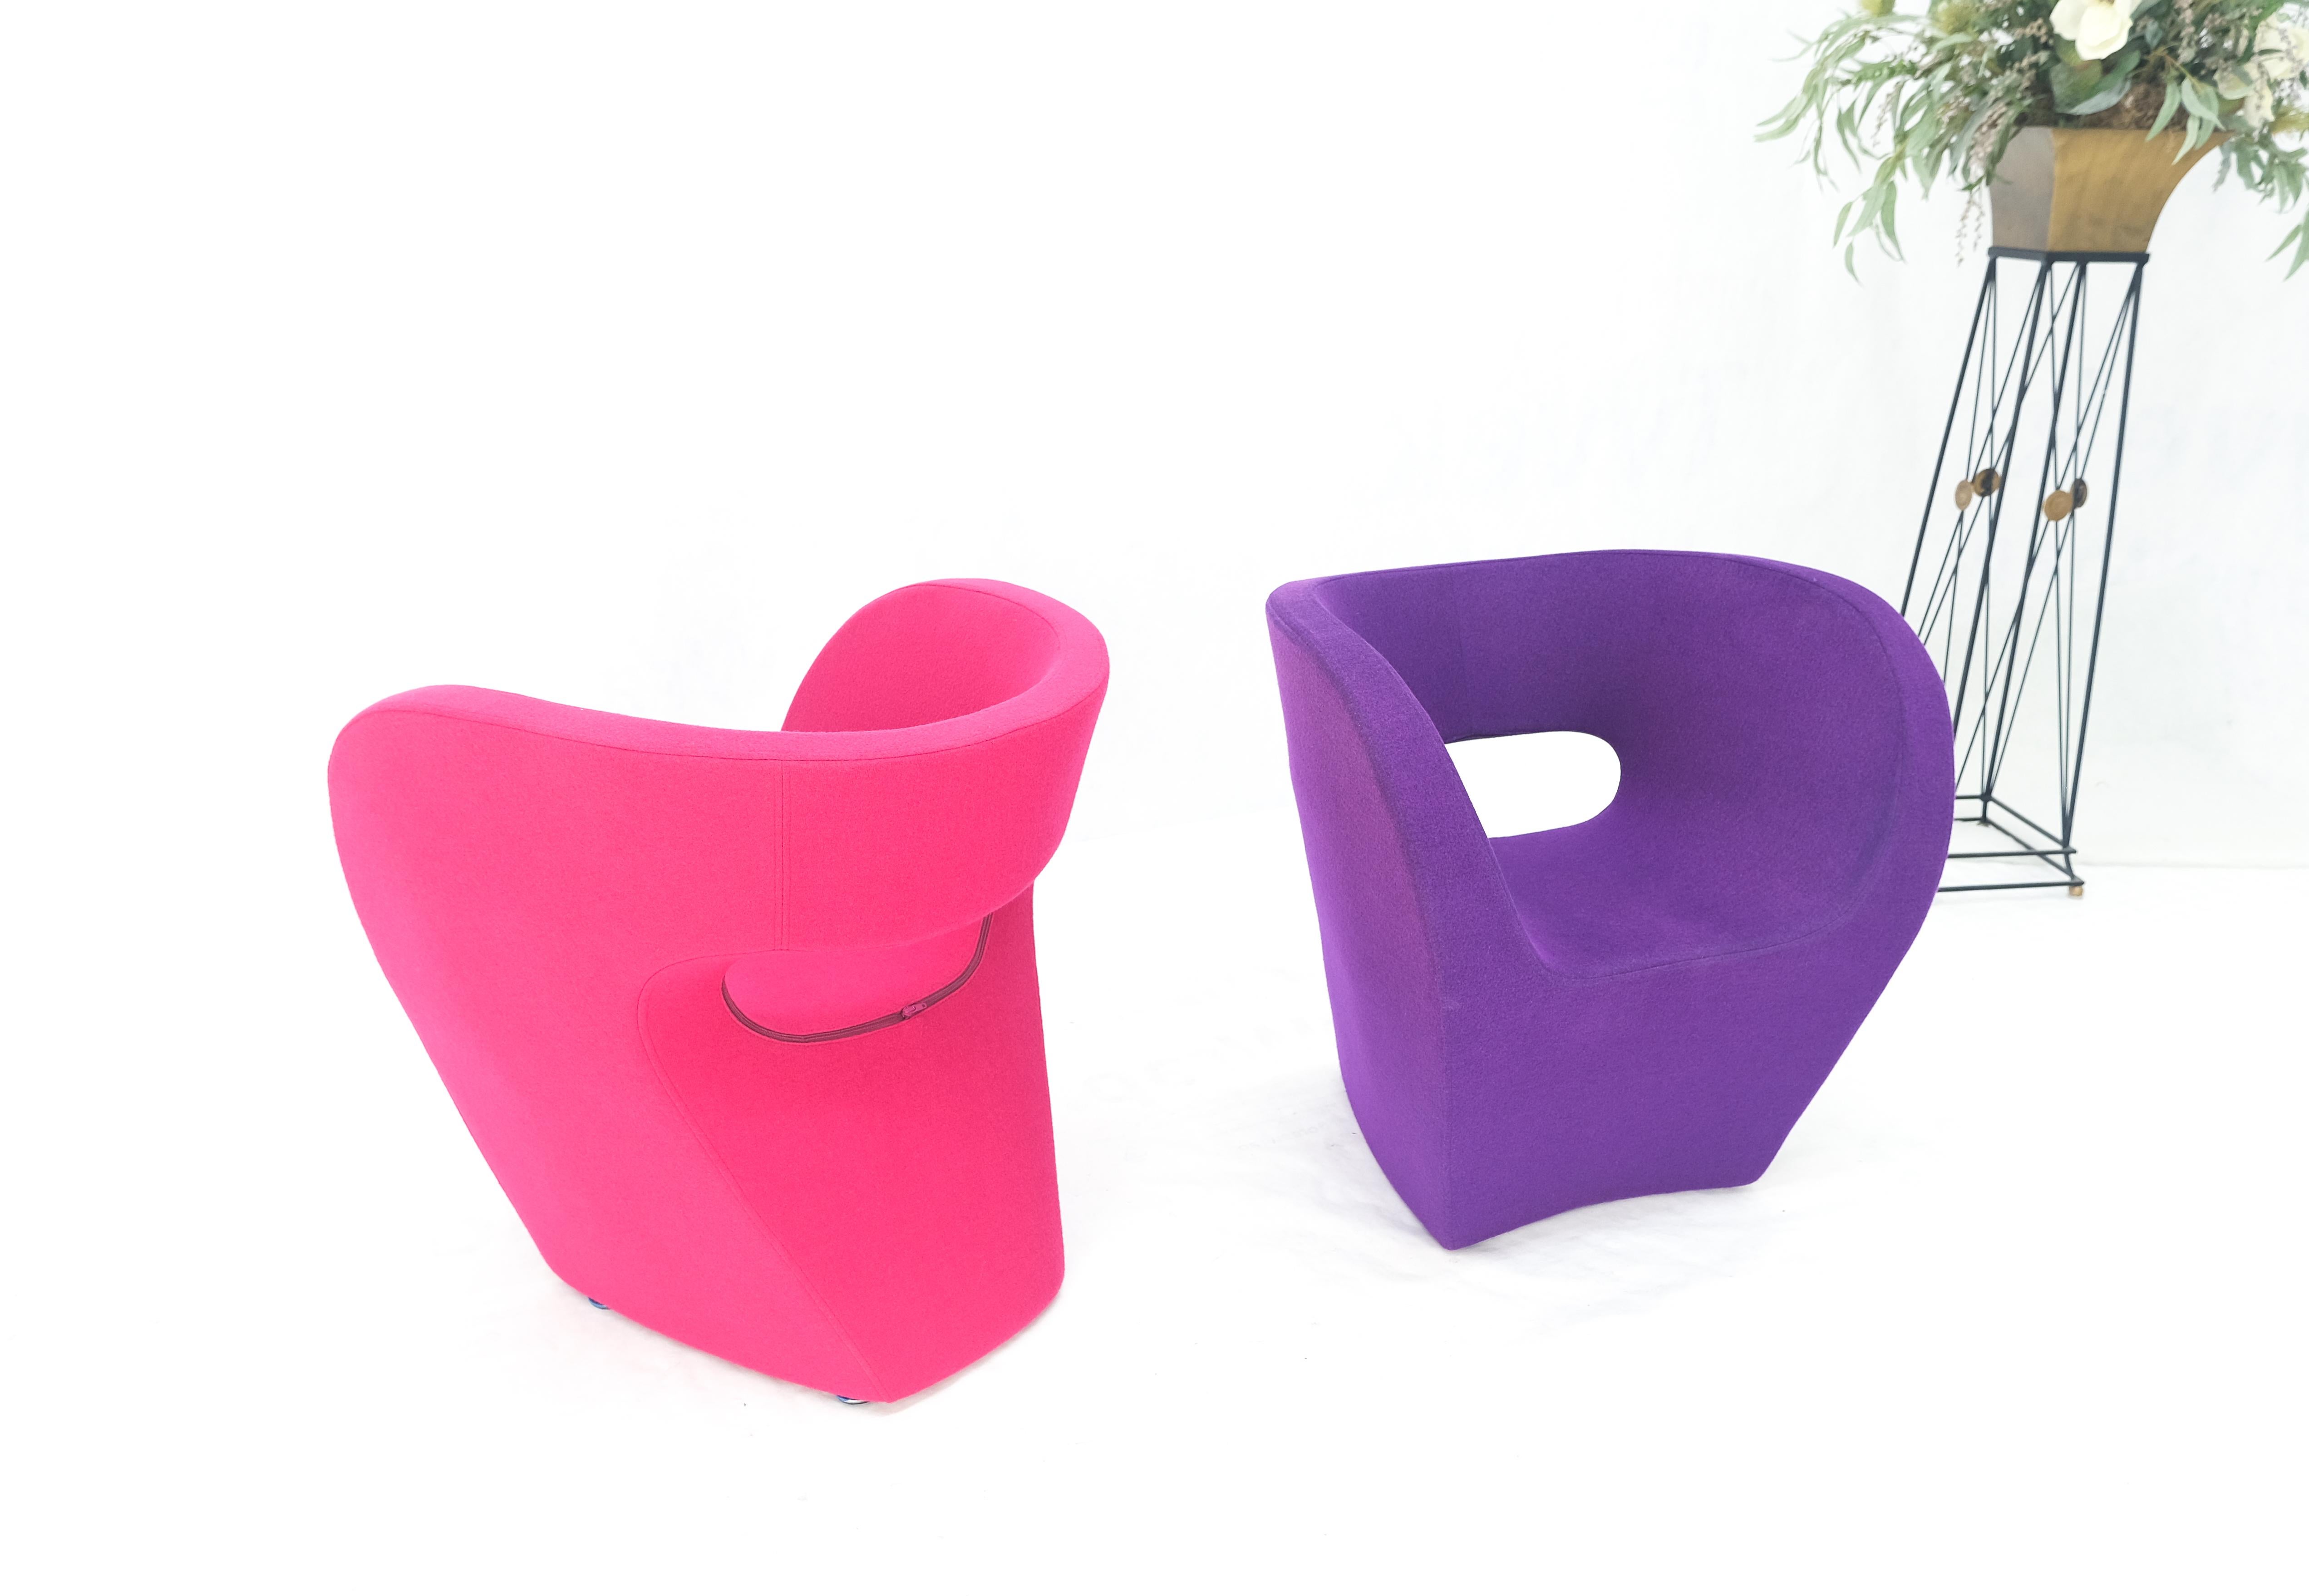 Set 4 Albert Armchair by Ron Arad for Moroso Purple & Red Wool Upholstery MINT! For Sale 10